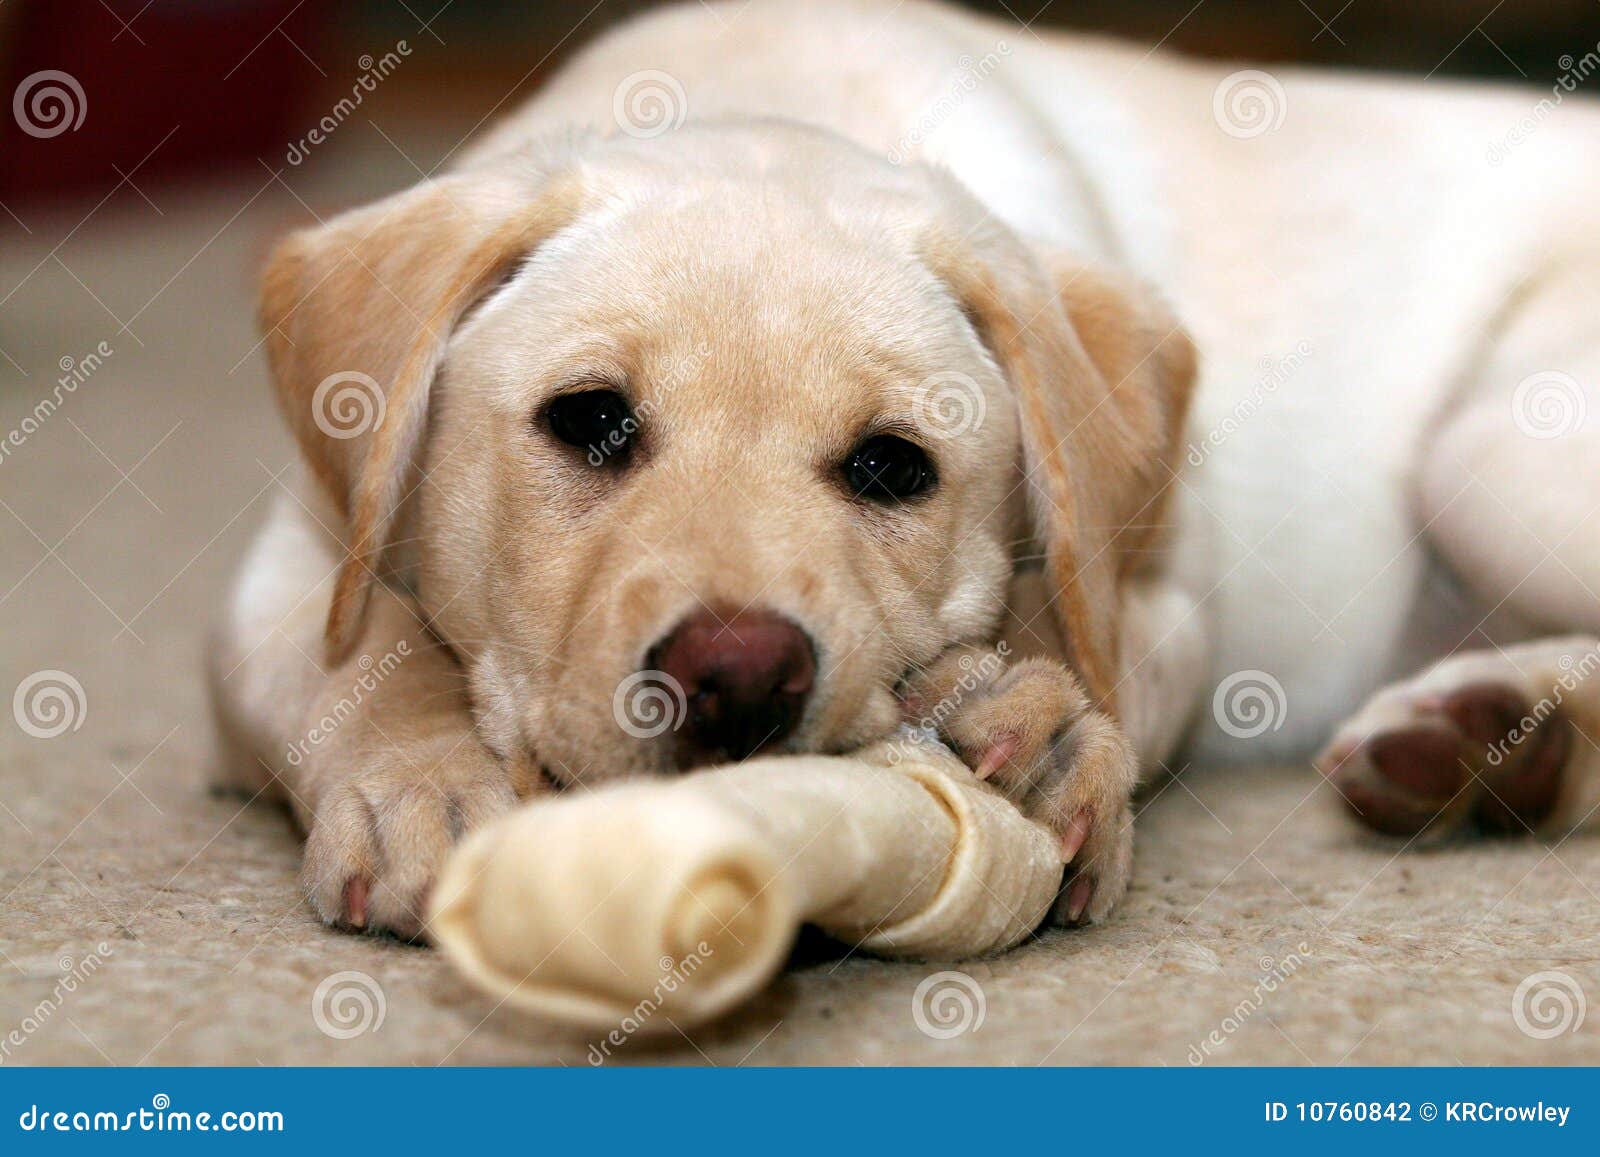 puppy and chew toy